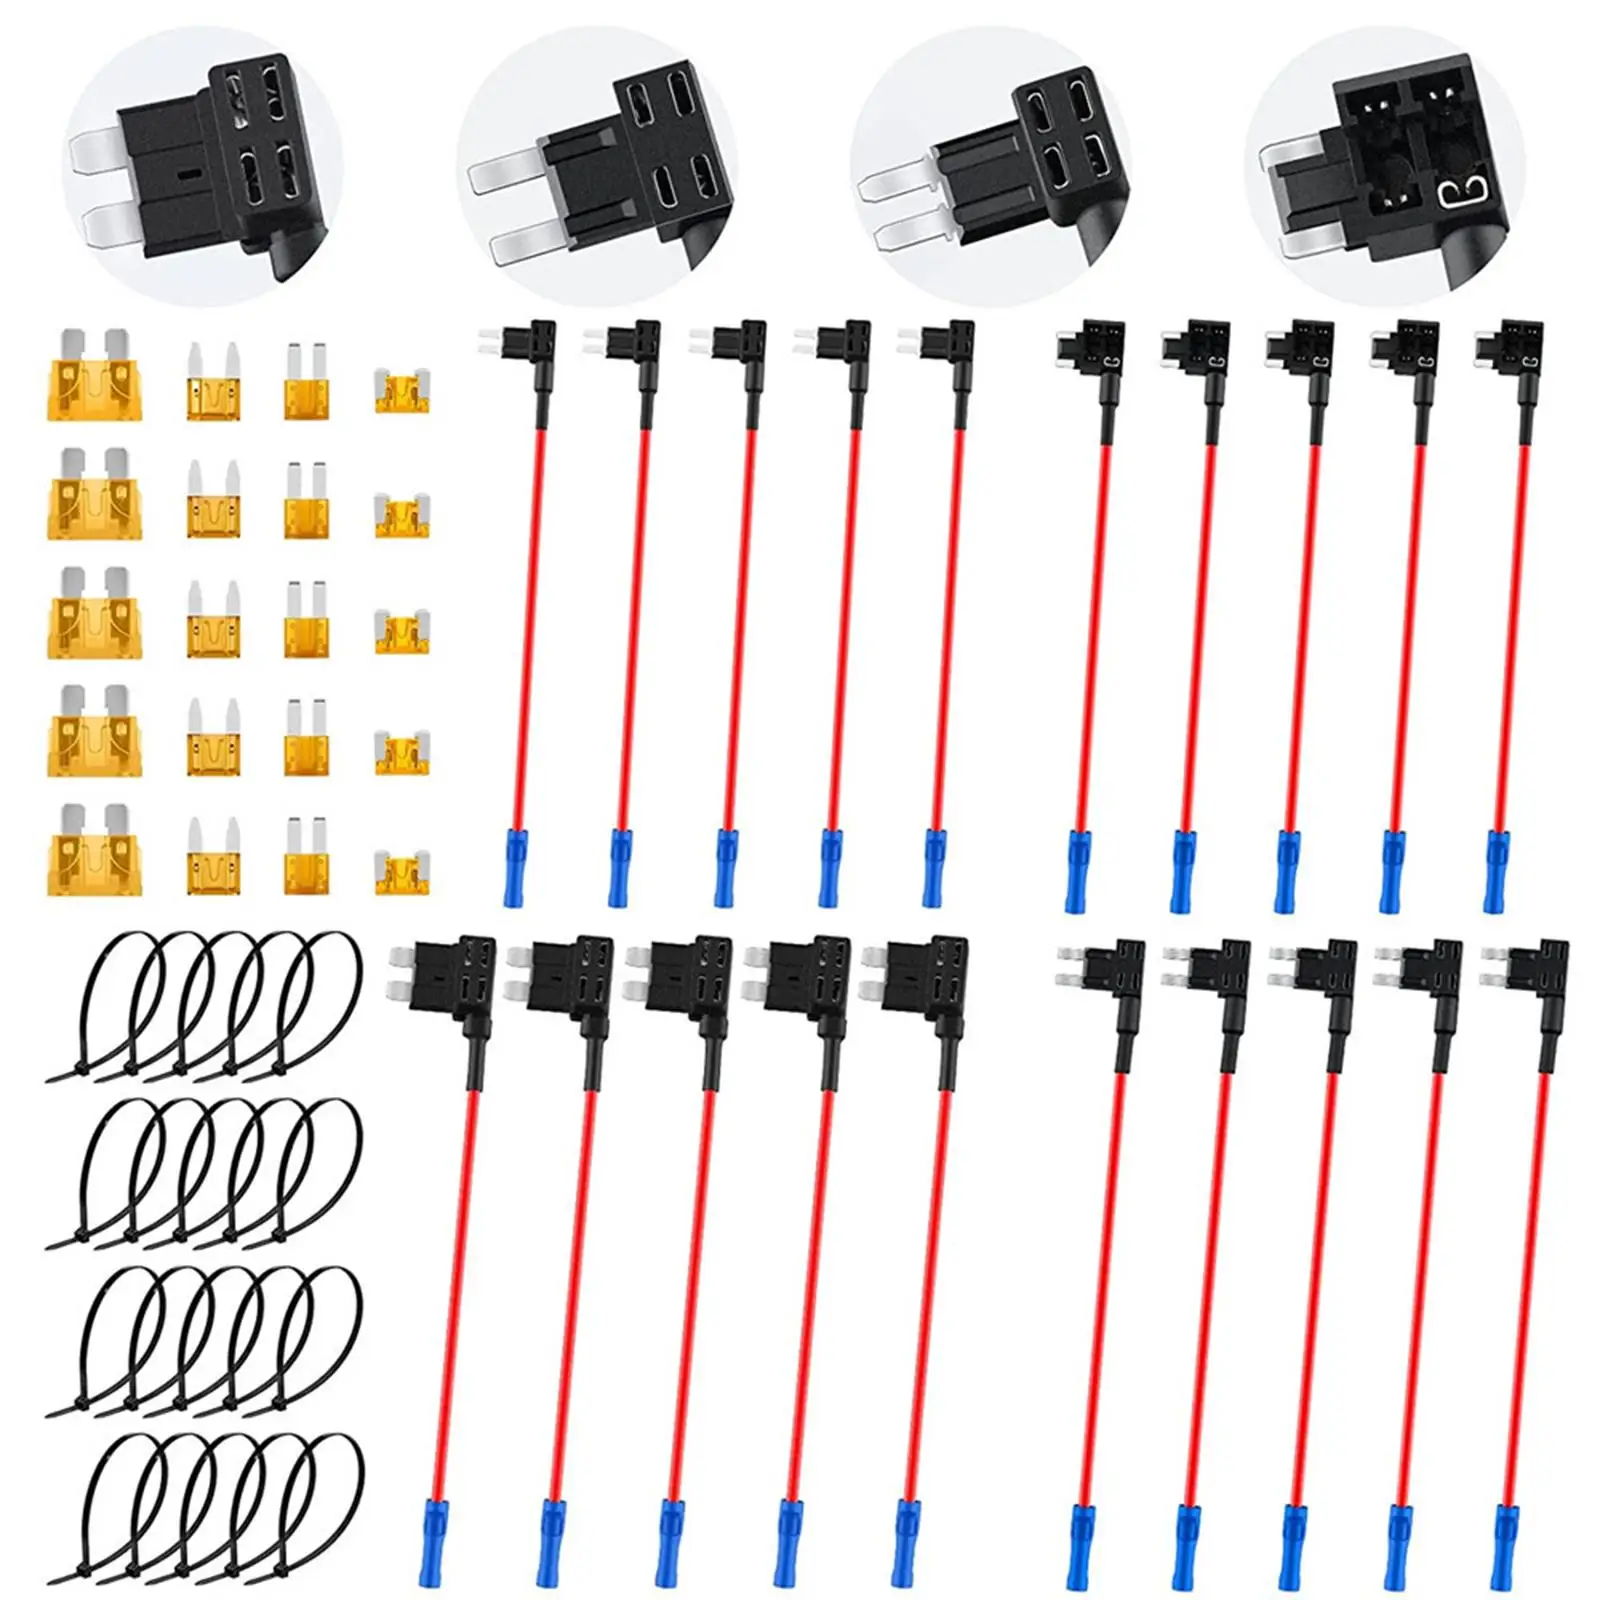 20x Car Add A Circuit Fuse Tap Adapter Set Professional Easy Installation Heat Resistant with Cable Tie Mini for Hardwiring